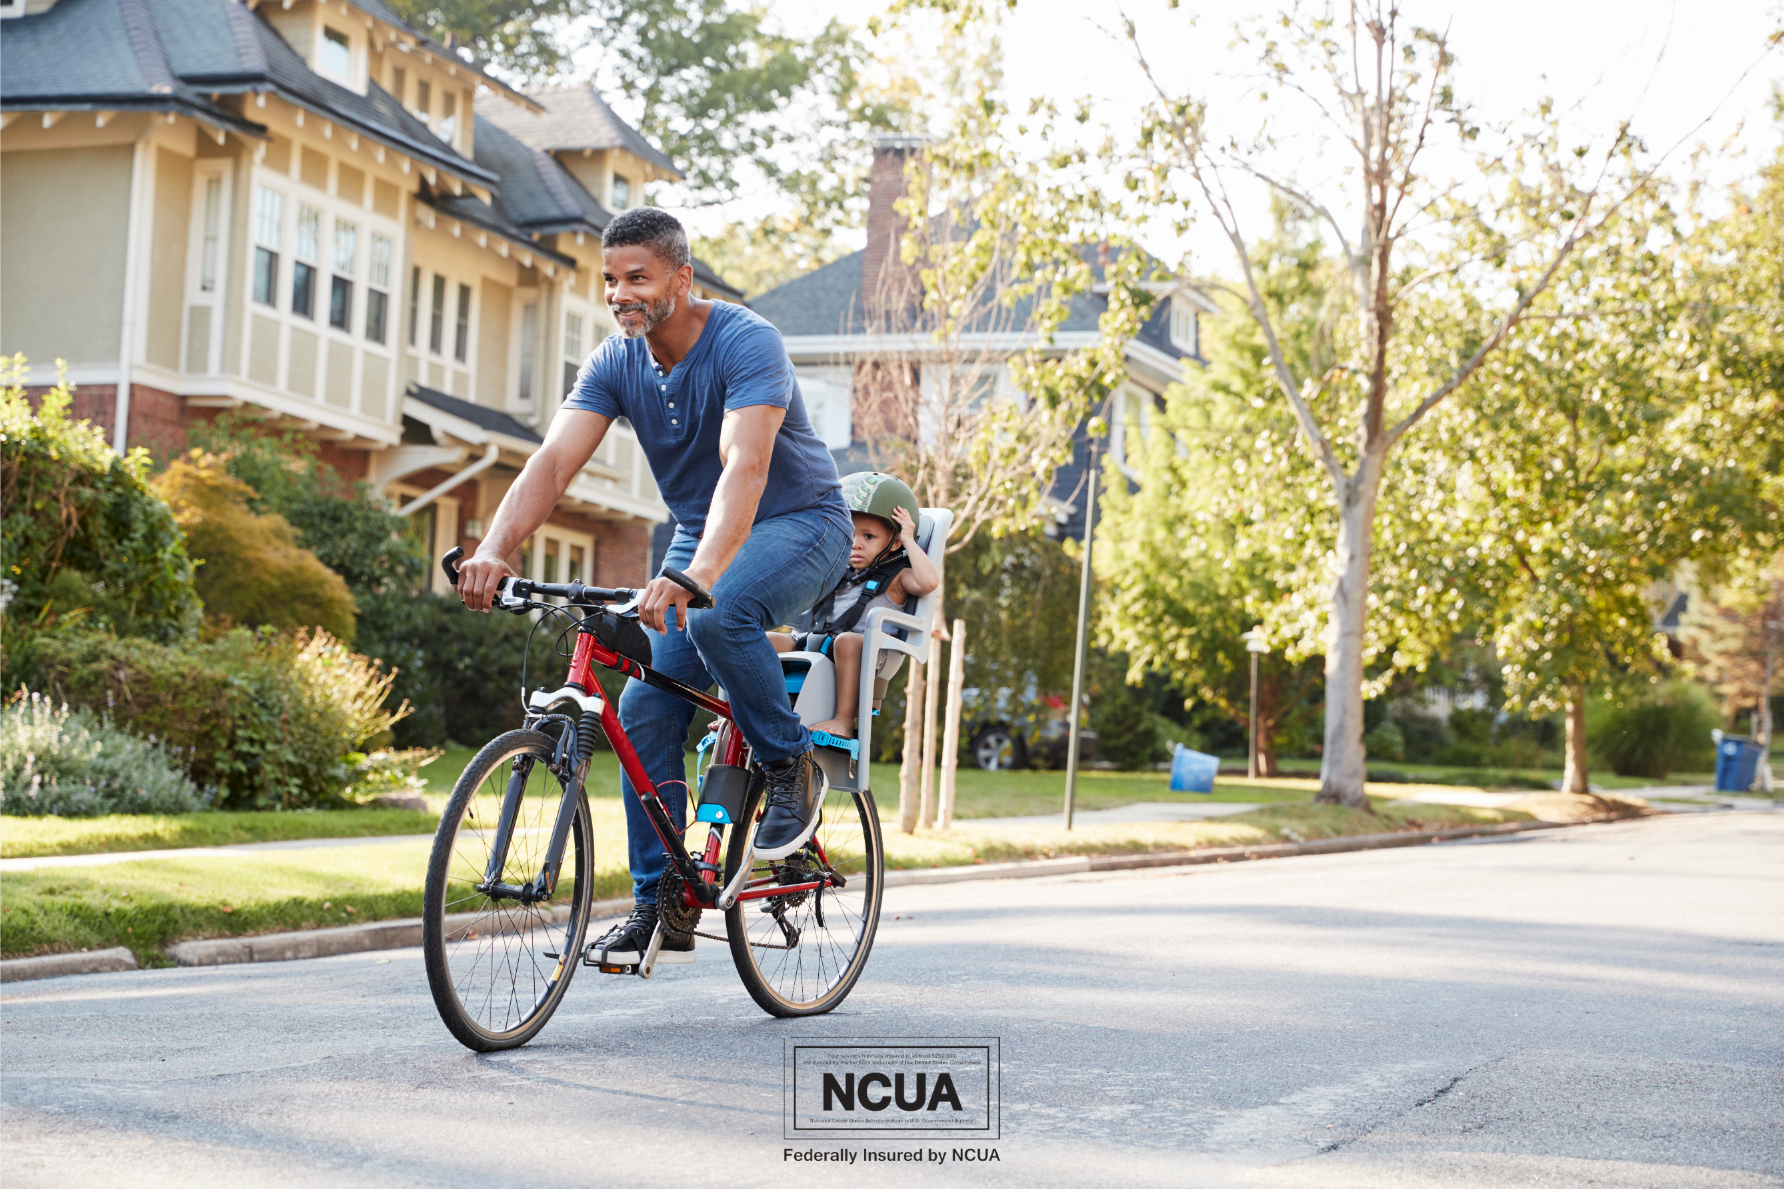 It's not too late to make financial resolutions for the new year. In this image, a man rides his bicycle in a residential neighborhood with his child in a child seat behind him. Buying a bike is one way to save money on gasoline expenses.